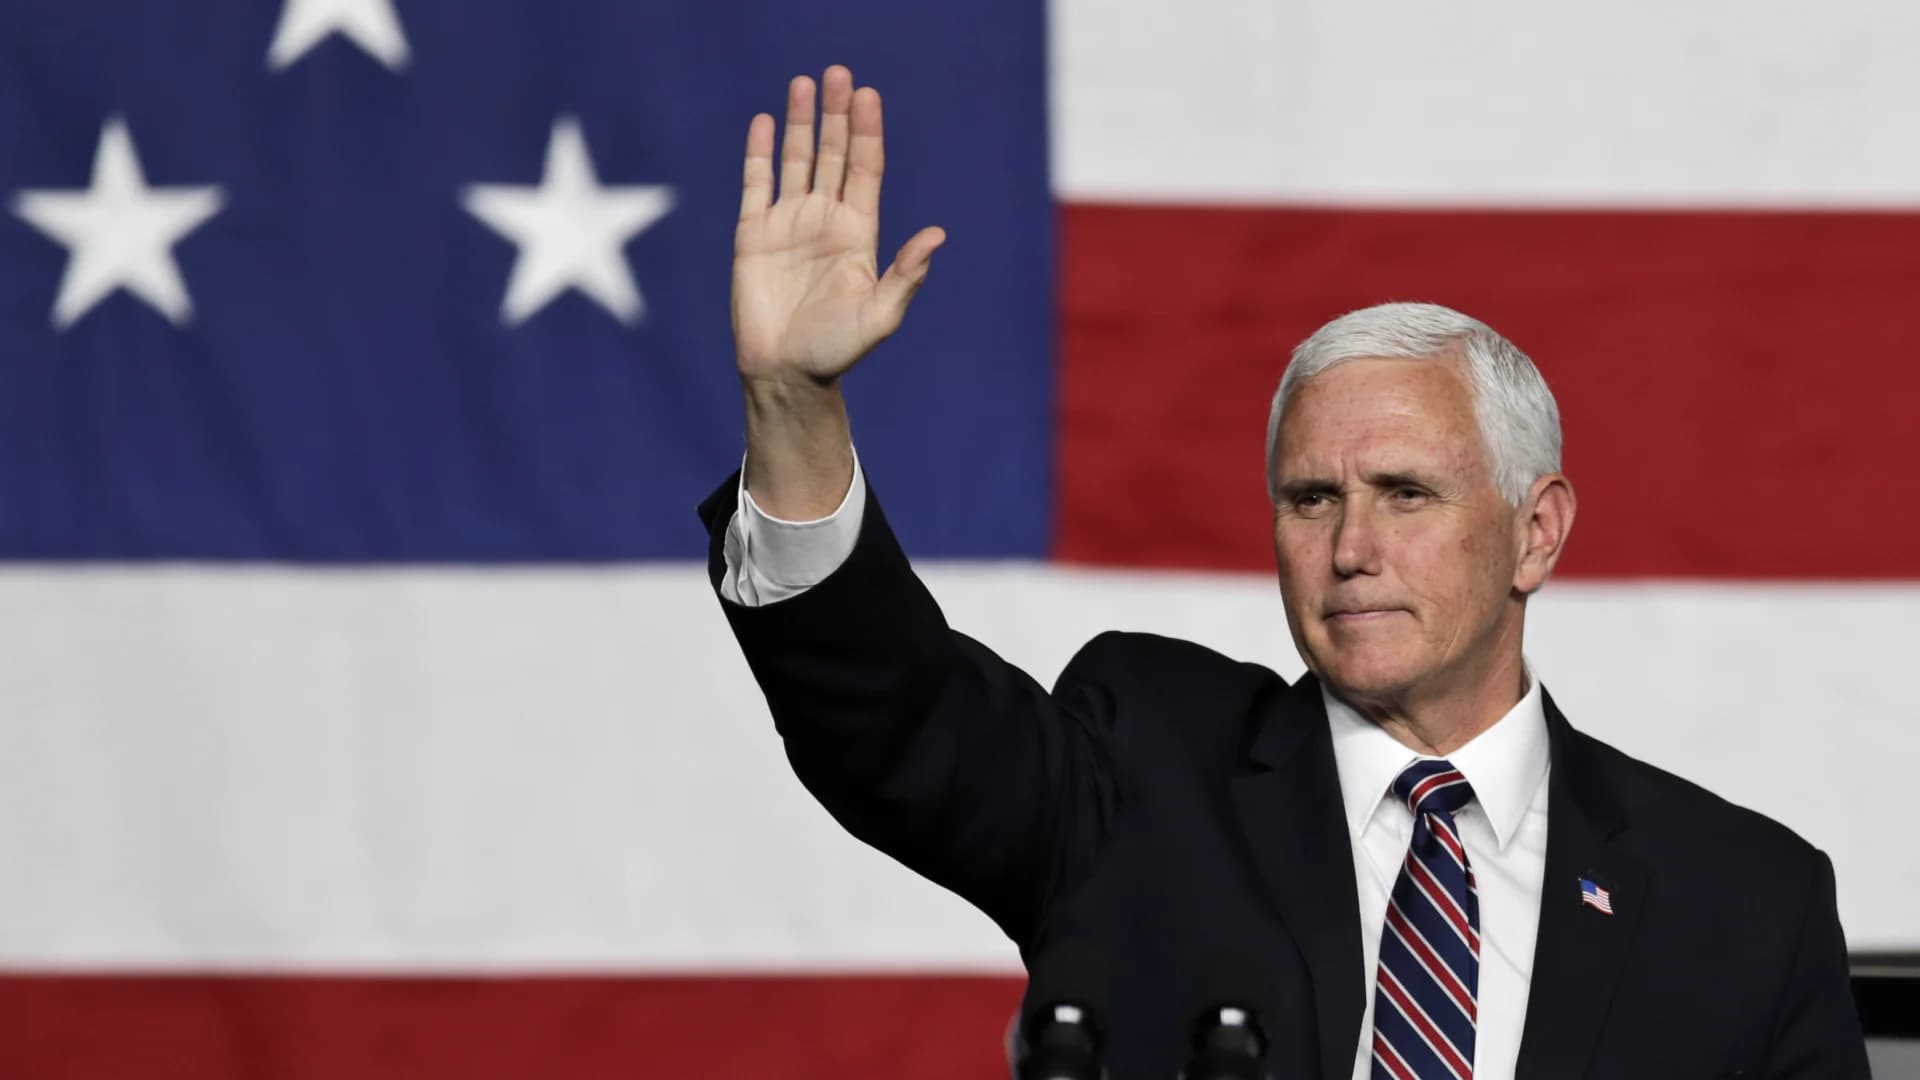 Pence hits Trump: No room in GOP 'for apologists for Putin'